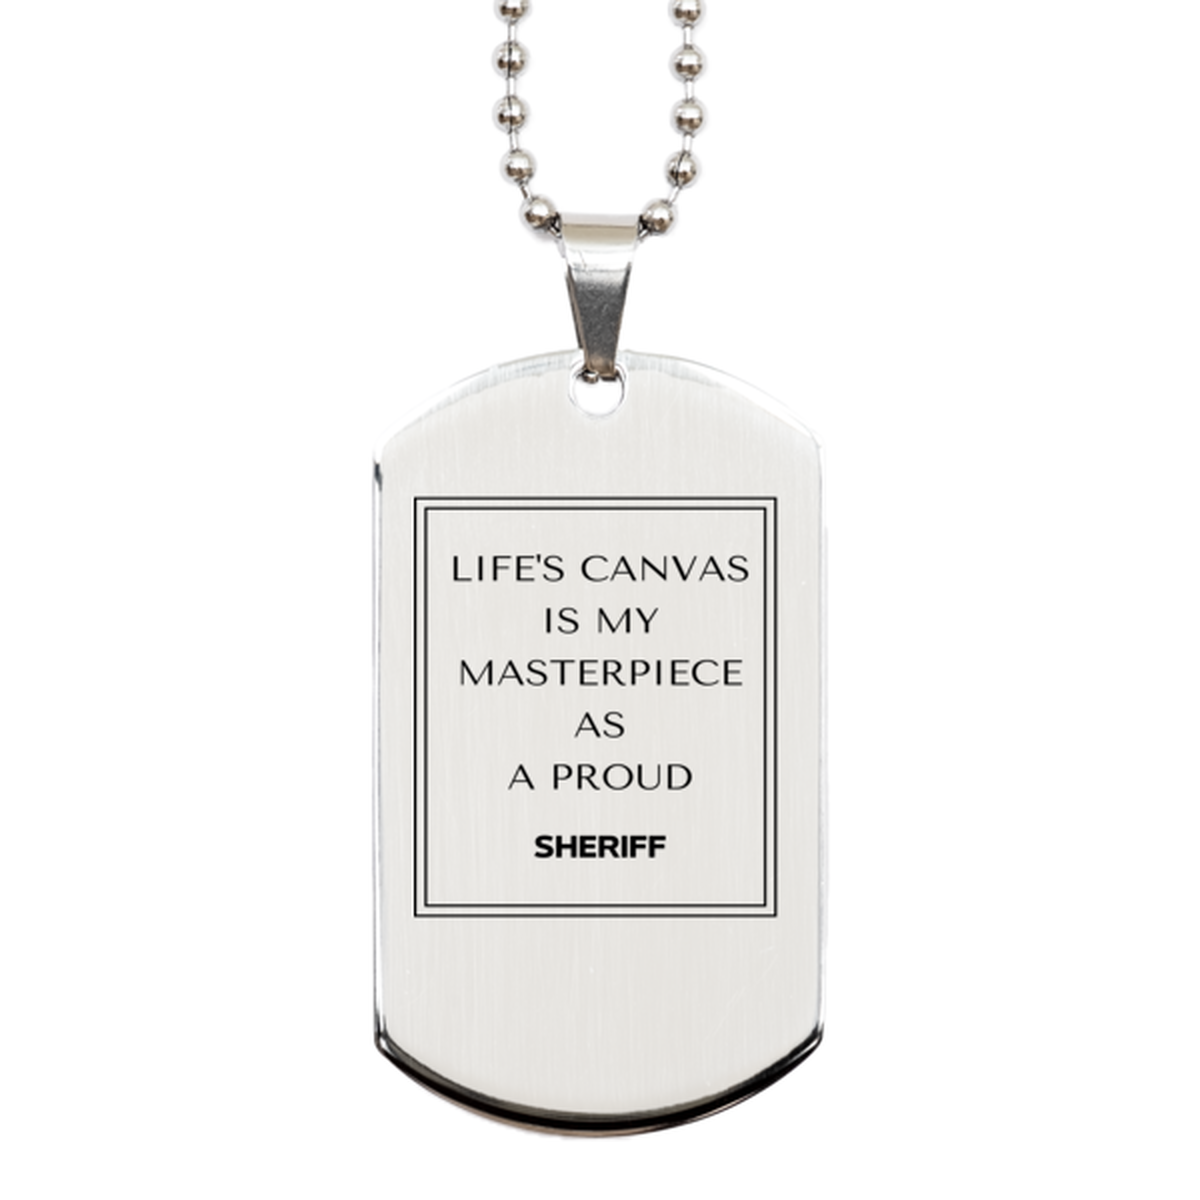 Proud Sheriff Gifts, Life's canvas is my masterpiece, Epic Birthday Christmas Unique Silver Dog Tag For Sheriff, Coworkers, Men, Women, Friends